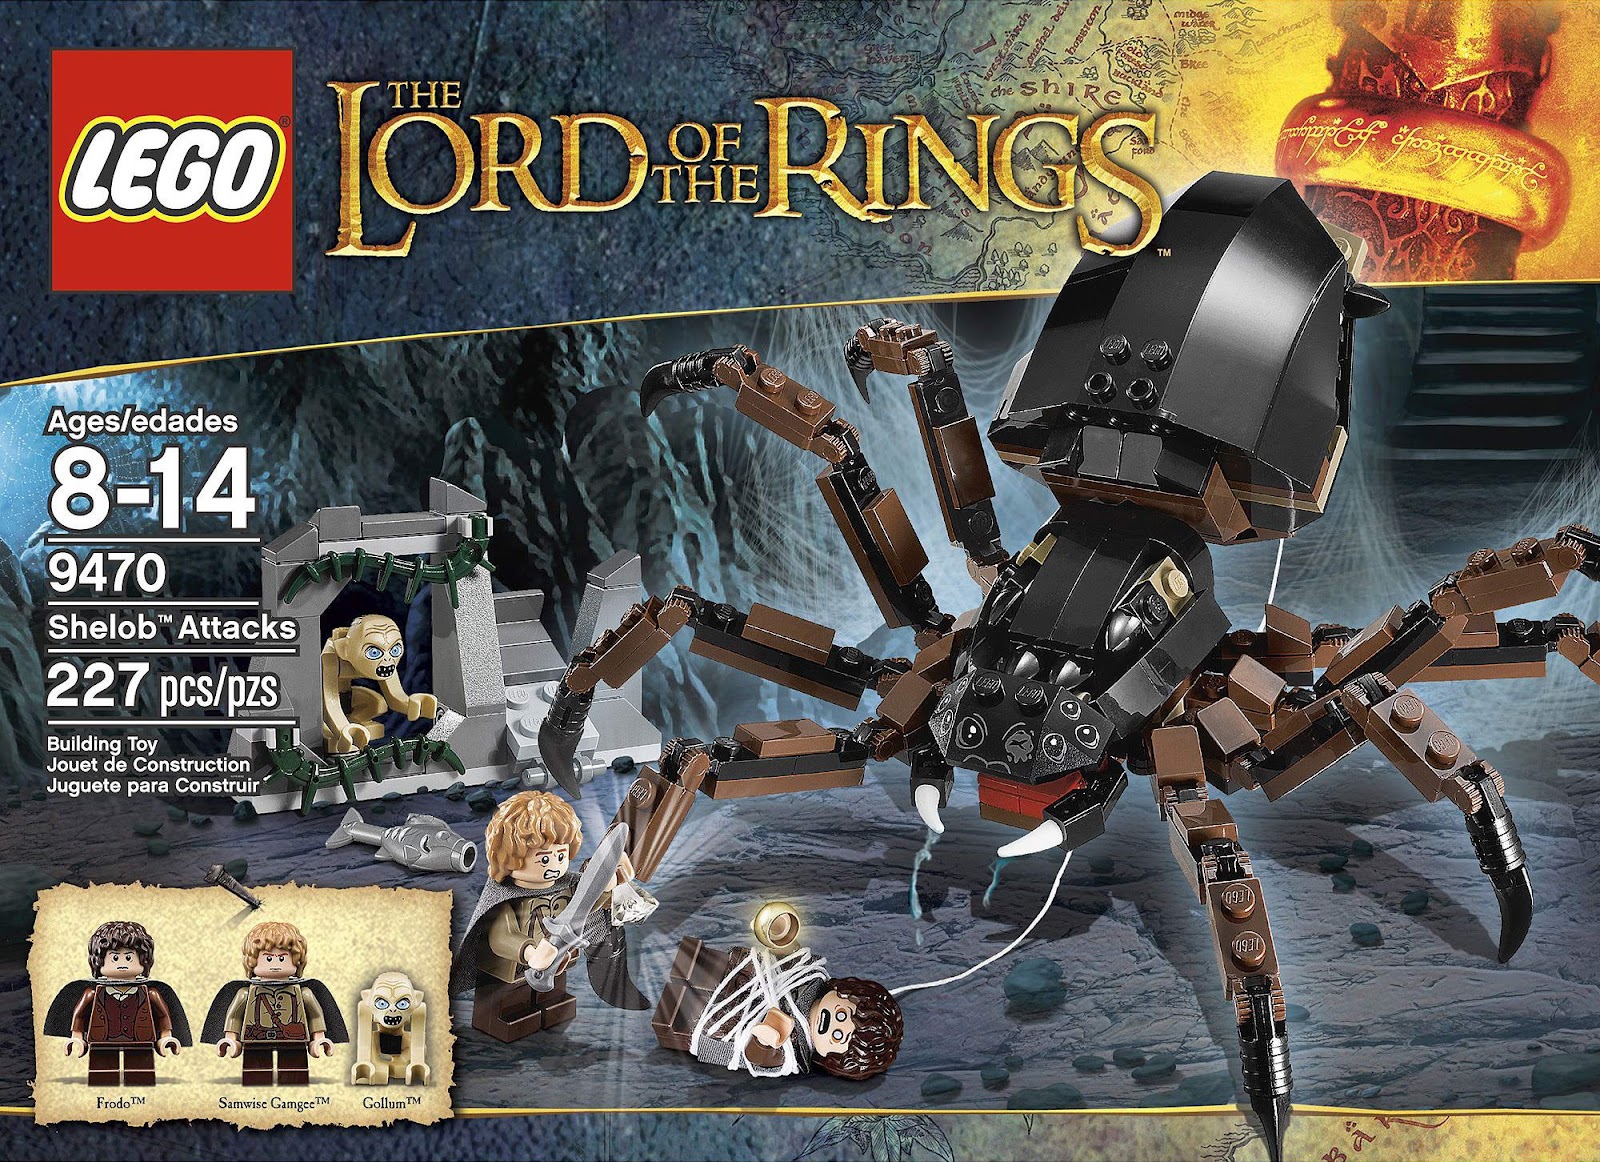 LotR brick Official LEGO The Lord of The Rings™ 9470 Shelob Attacks